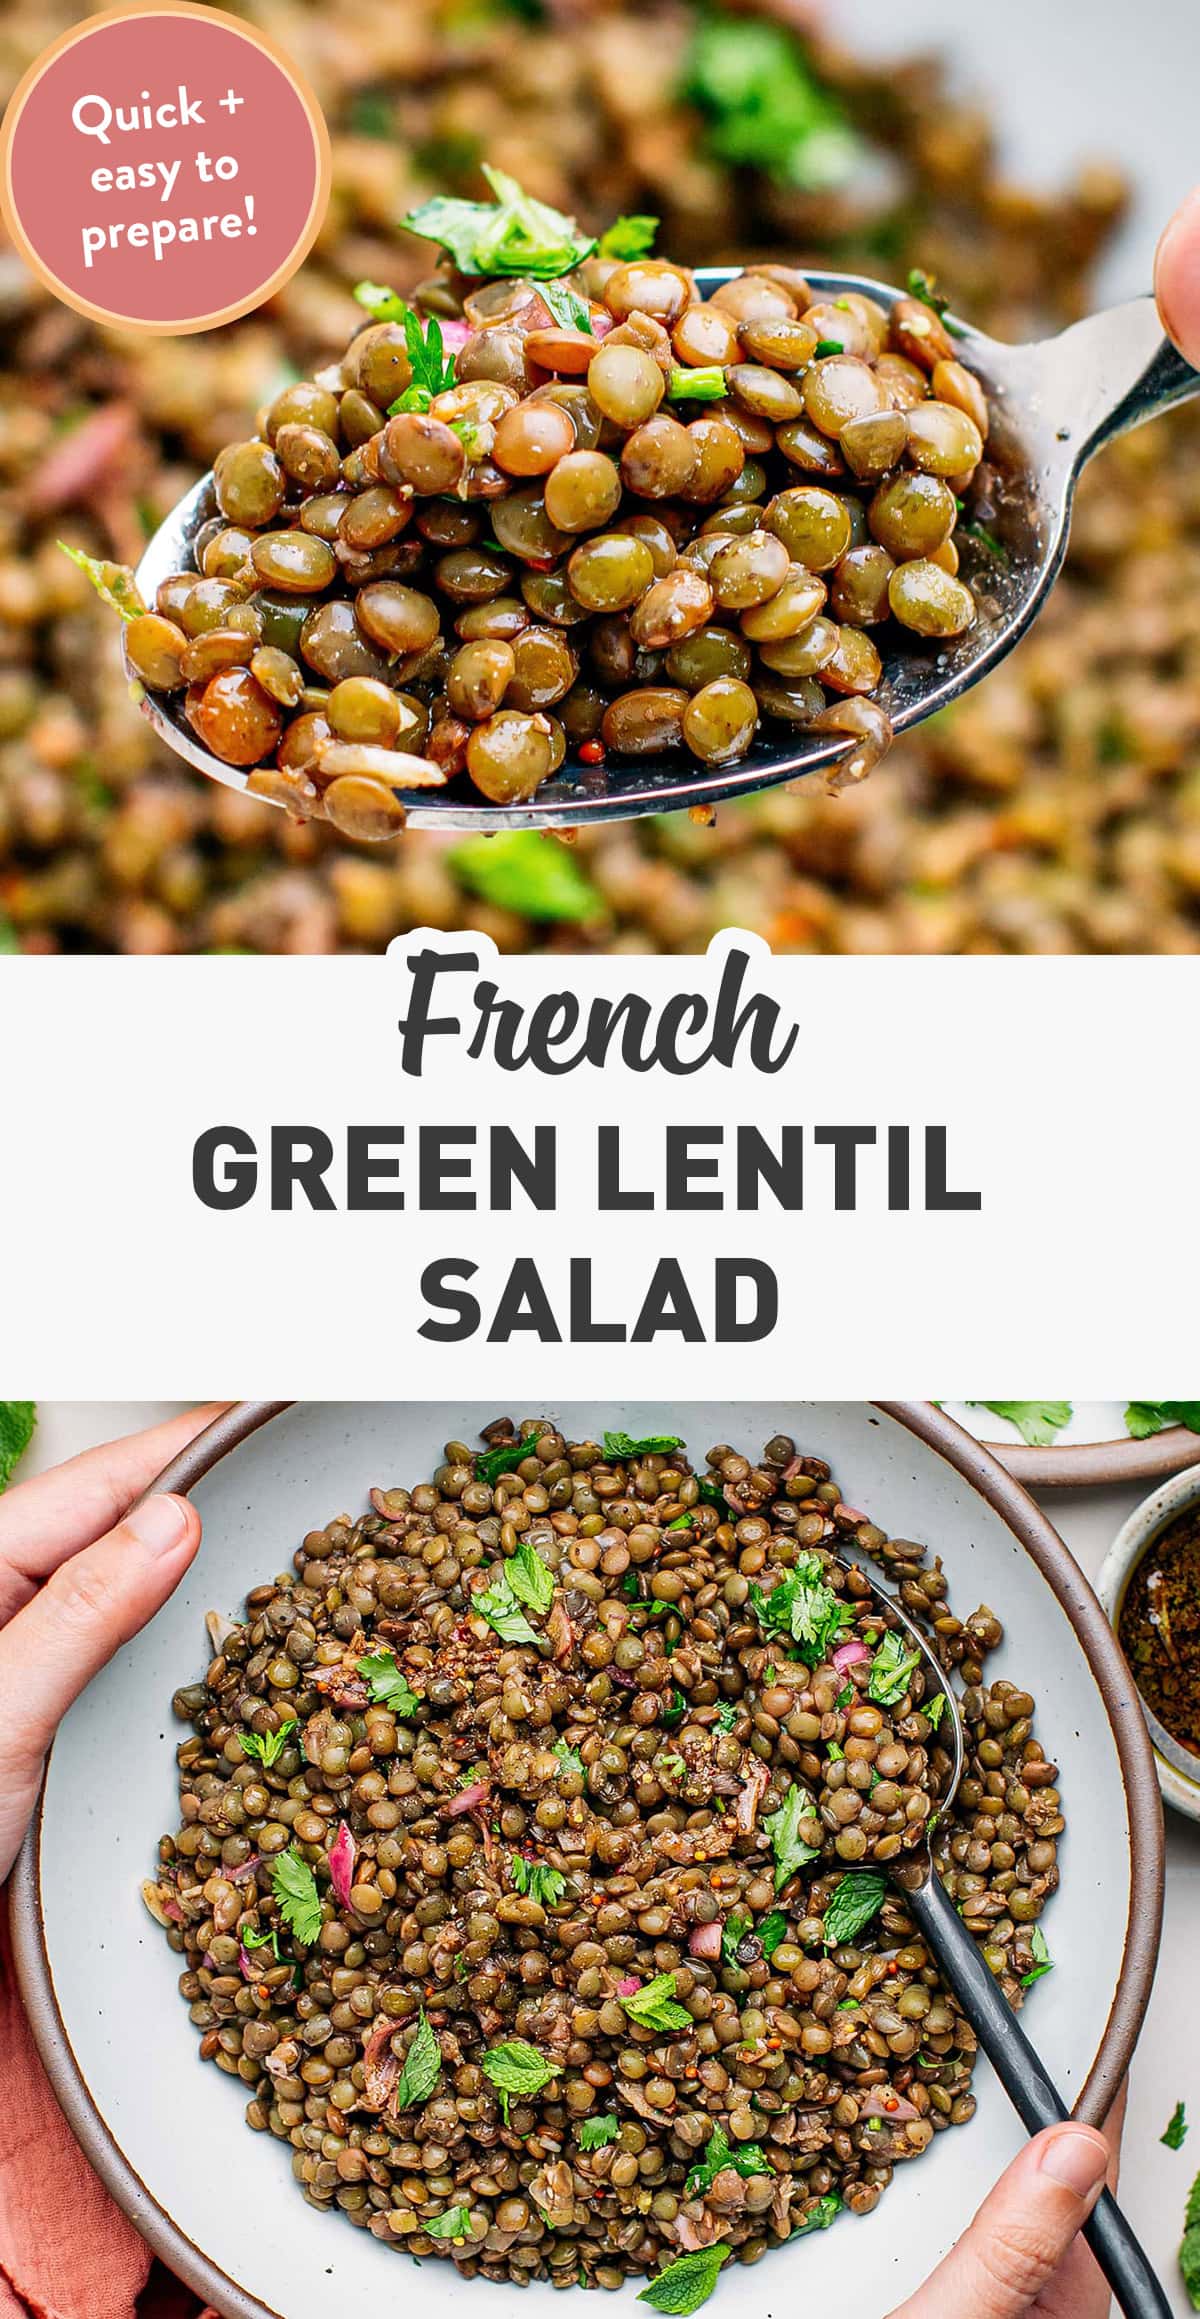 This 30-minute French-inspired green lentil salad is hearty, fresh, and flavored with a bright Dijon mustard vinaigrette! Delightful and wholesome, this rustic salad comes together in less than 30 minutes. Perfect as a light summer appetizer or as a side dish! #greenlentils